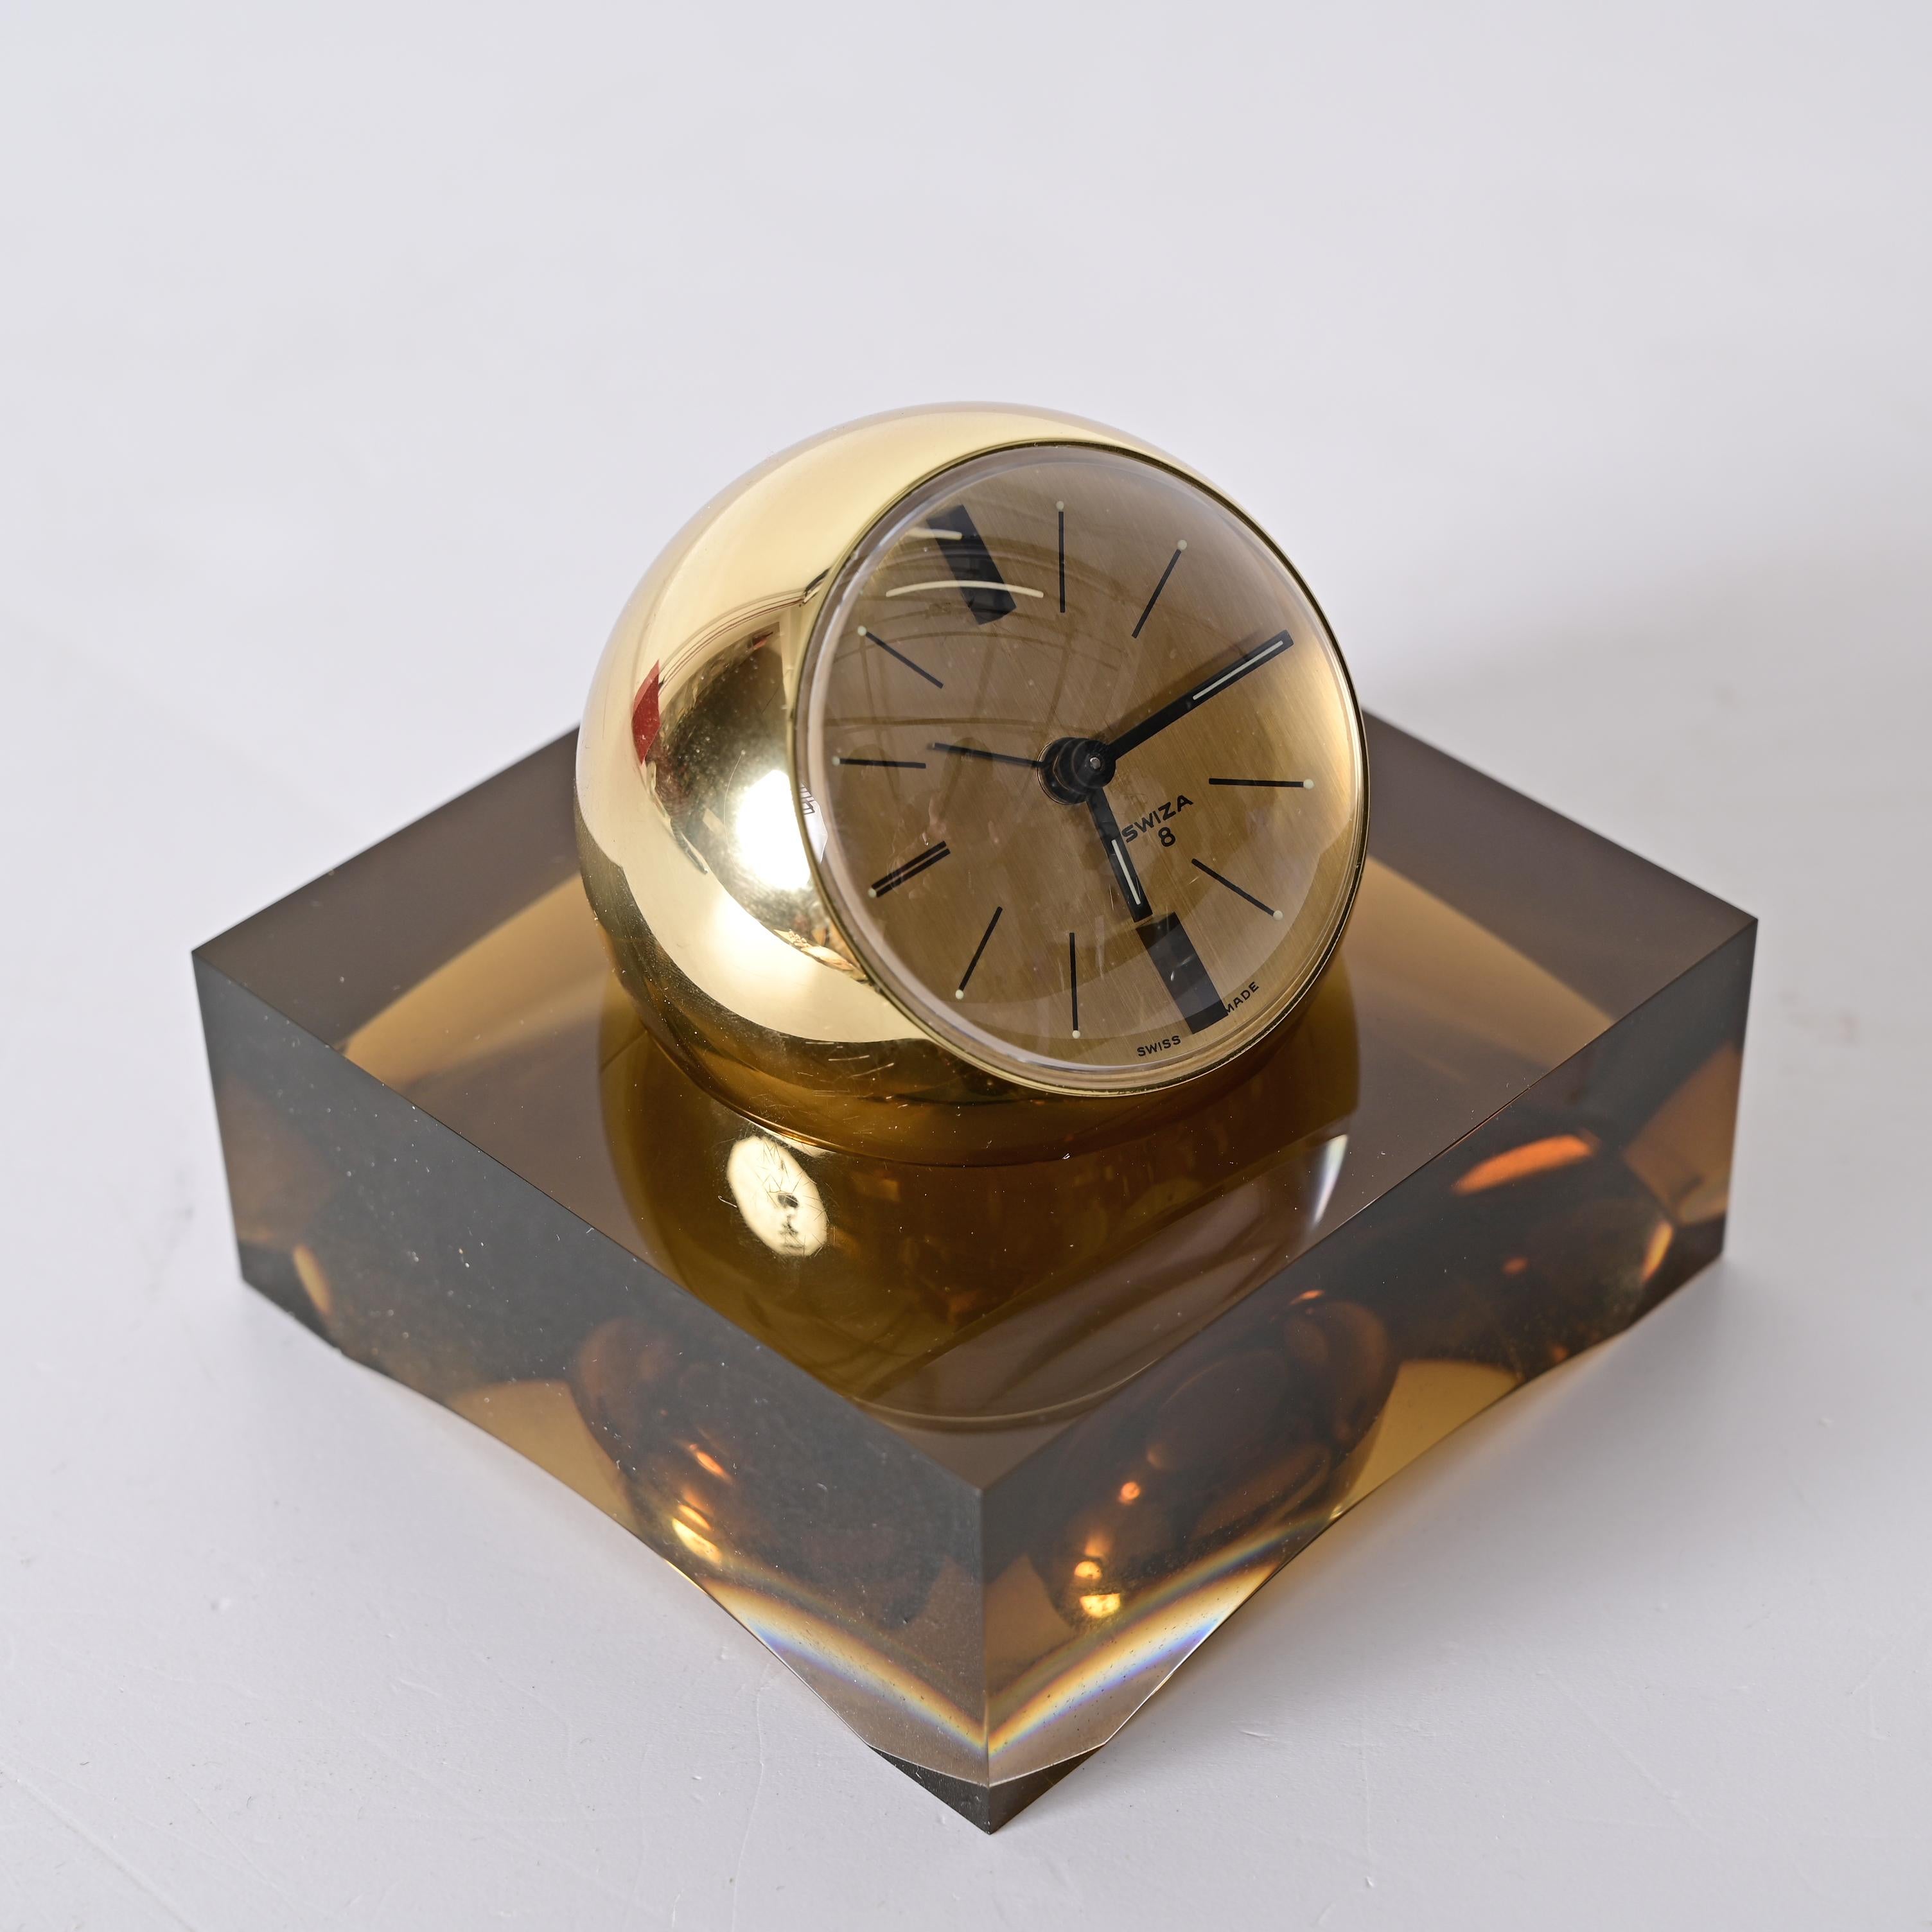 Swiza 8 Day Rare Gilt Sphere Clock with Smoked Lucite Base, Box and Guarantee In Good Condition For Sale In Roma, IT